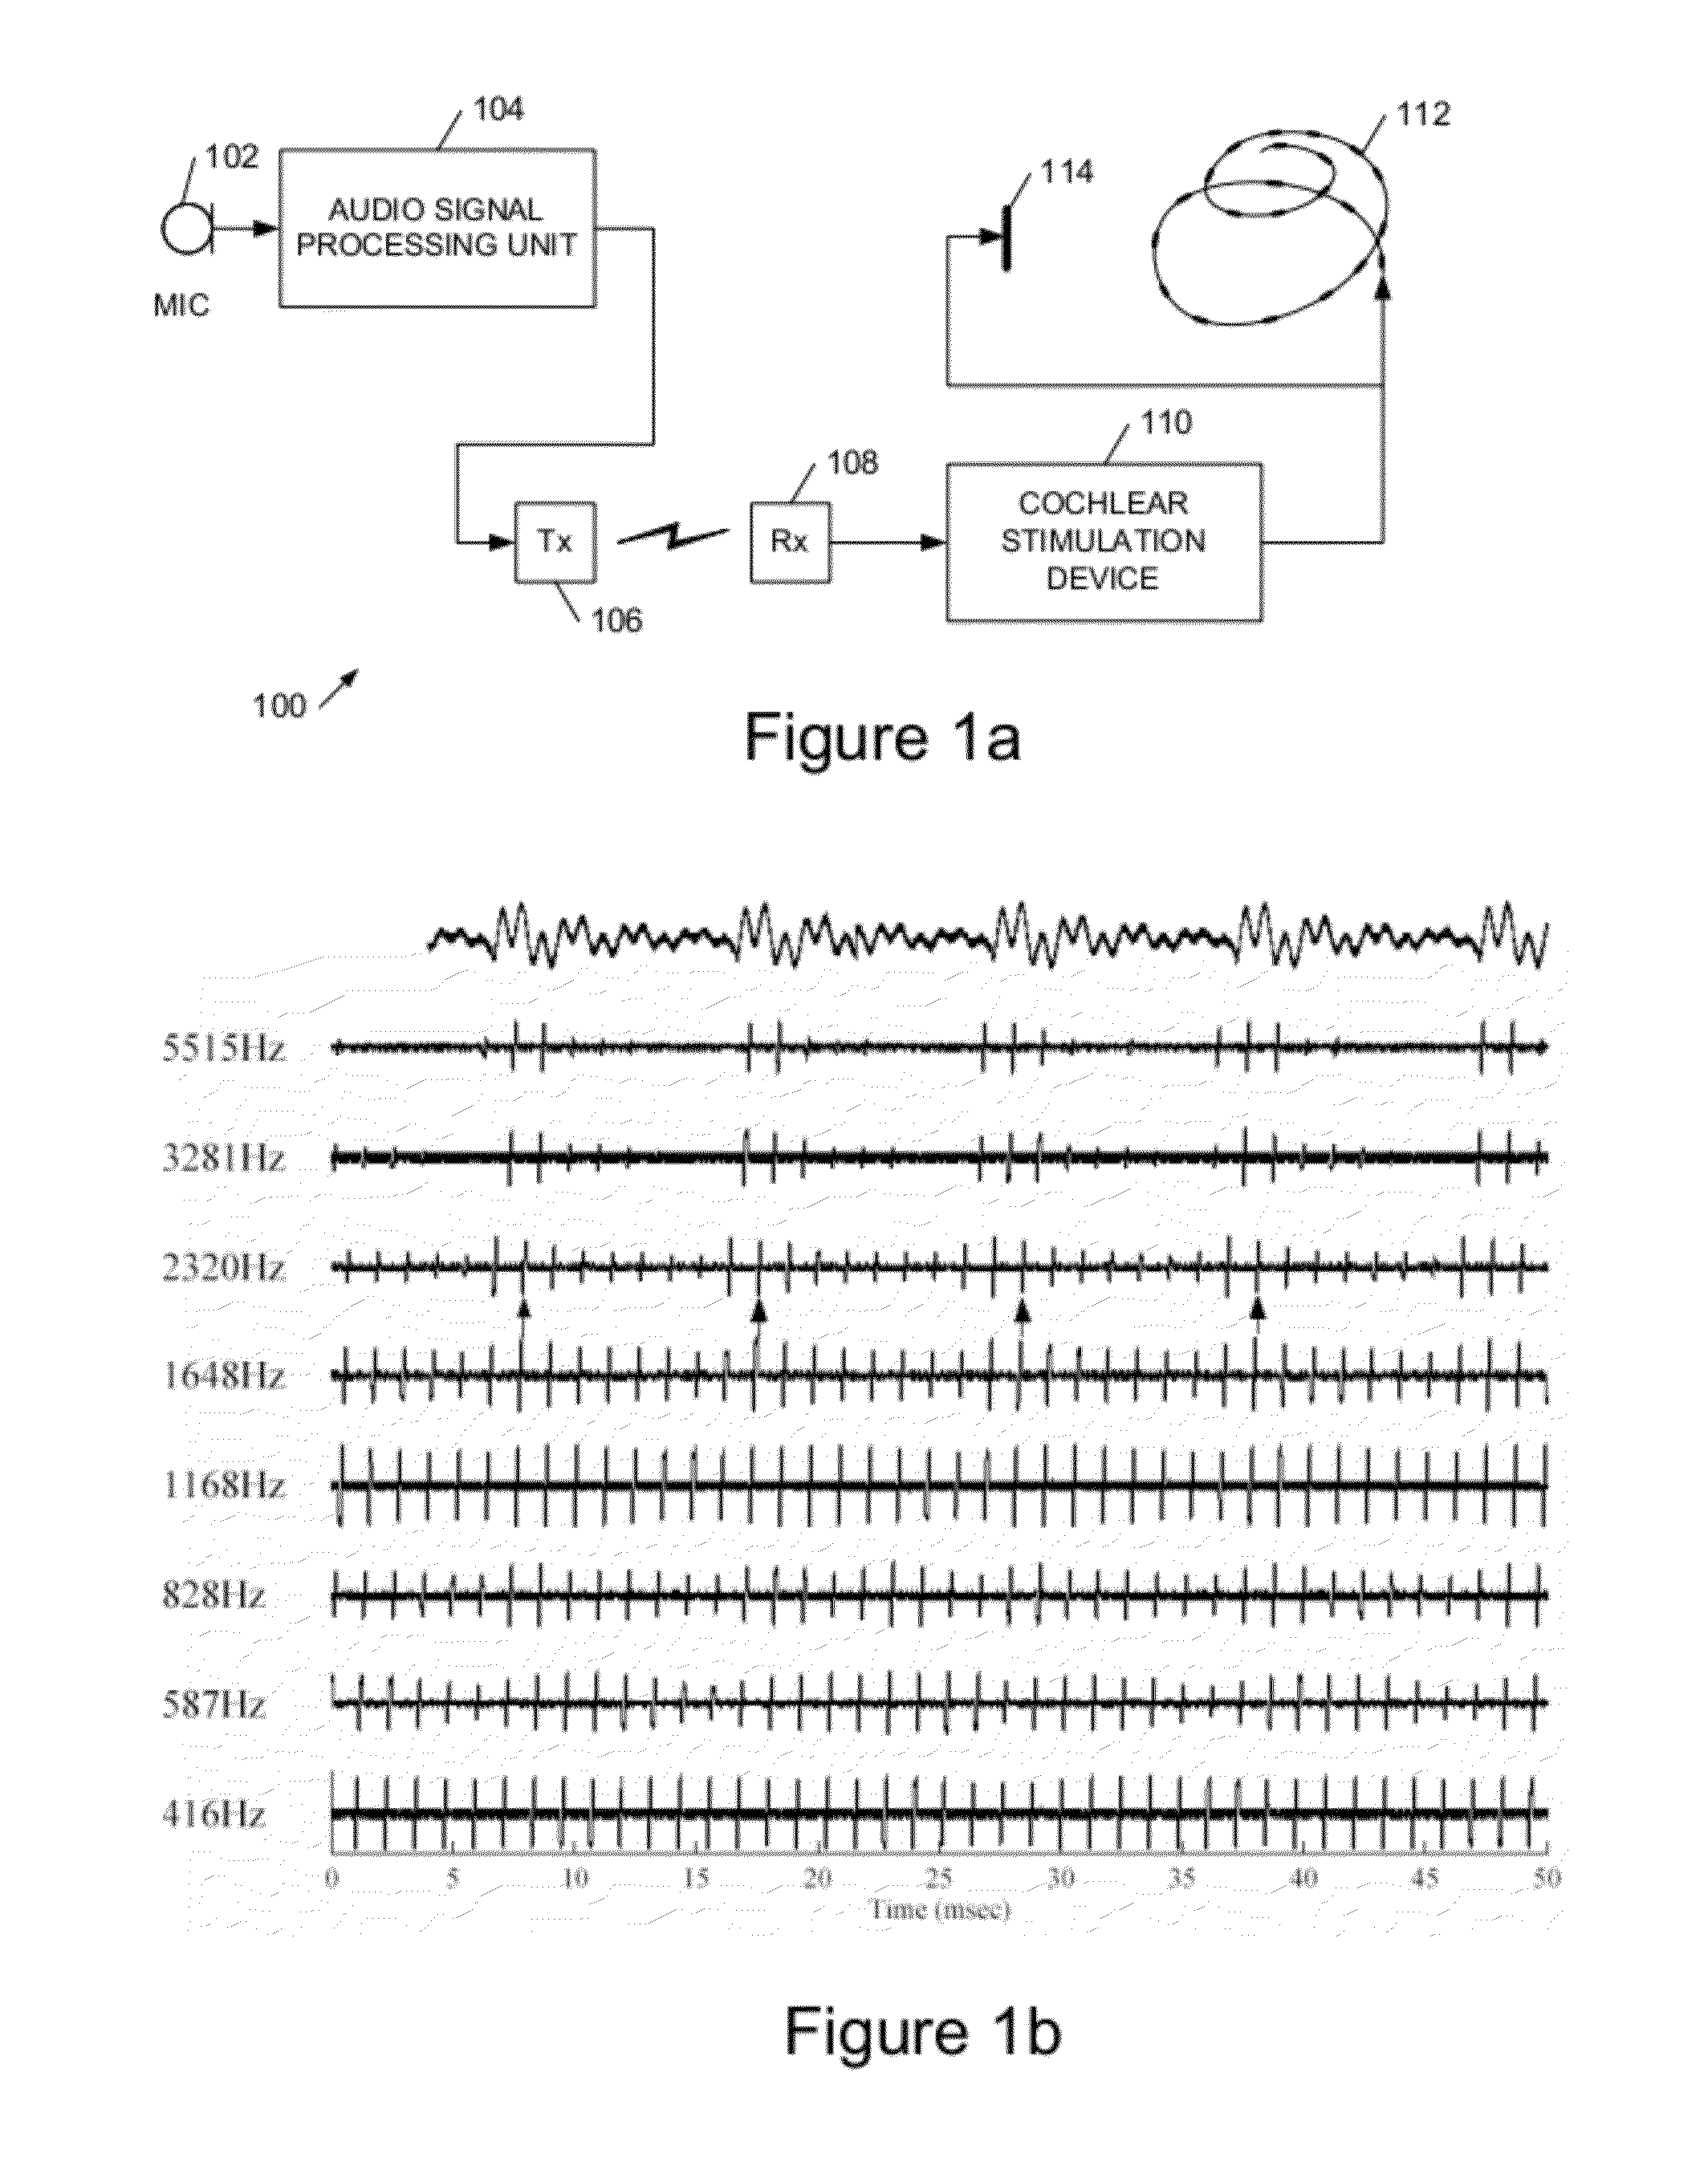 Cochlear implant apparatus and methods